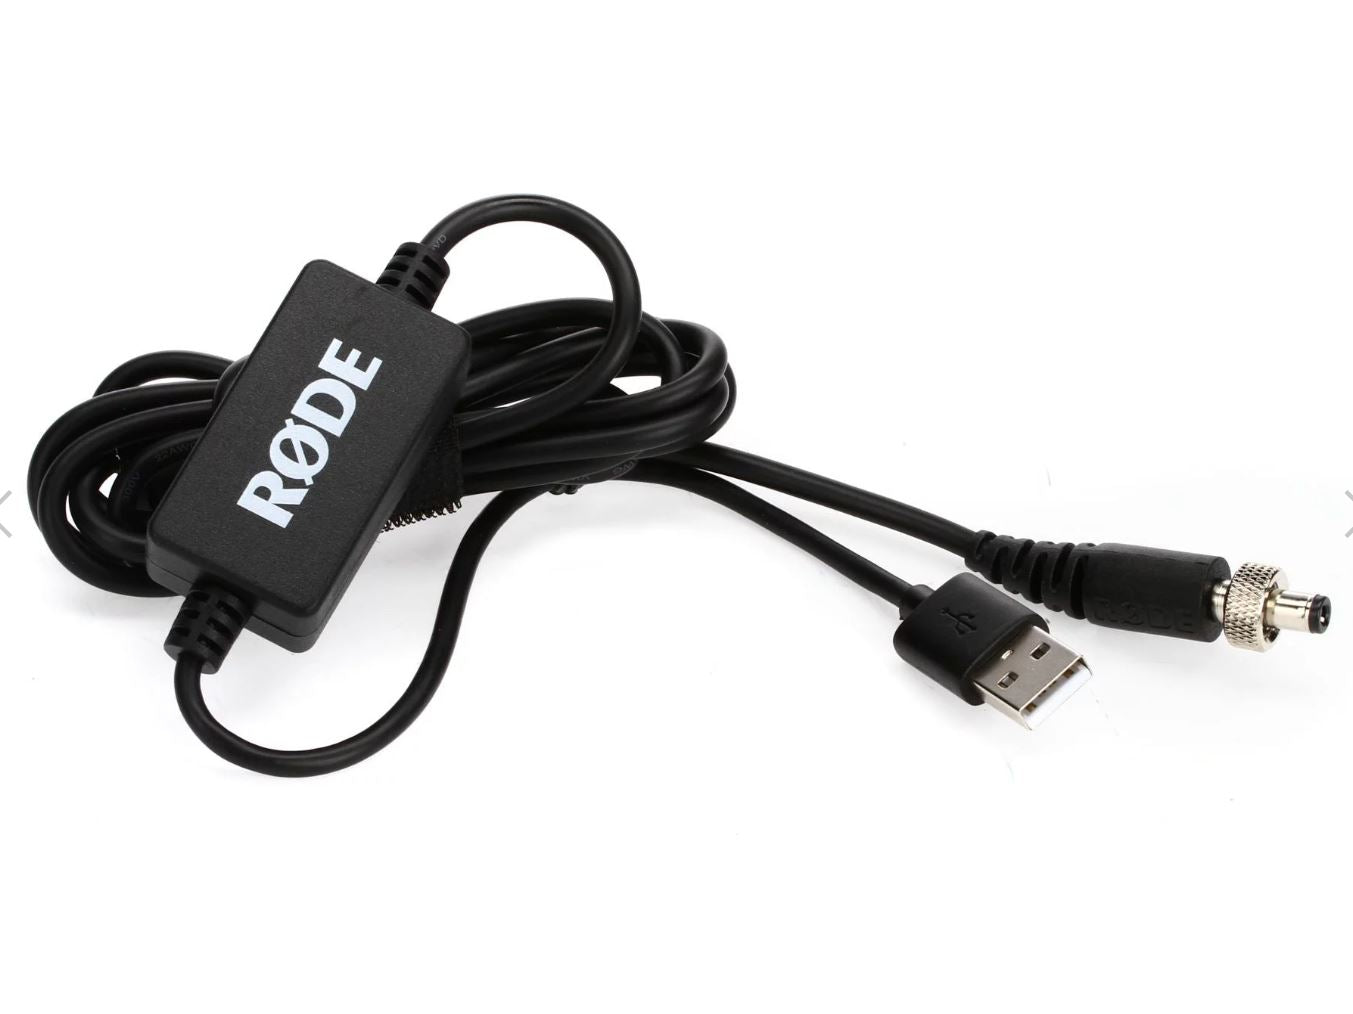 Rode USB Power Cable Adapter for RODECaster Pro with Locking Connector DC-USB1 DCUSB1 DC USB1